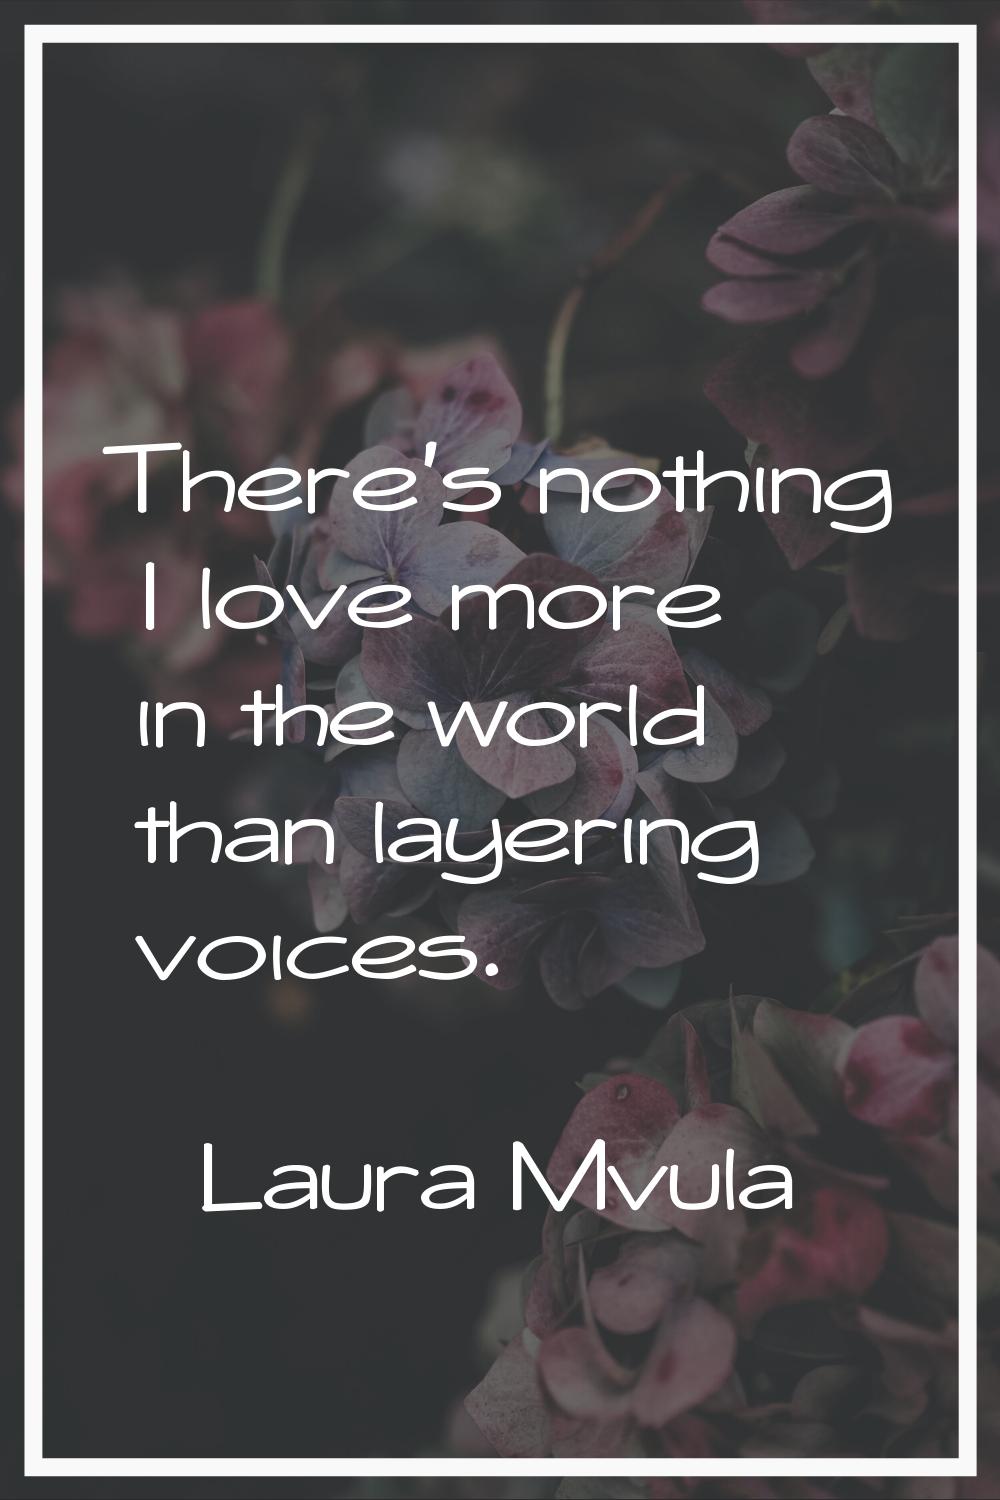 There's nothing I love more in the world than layering voices.